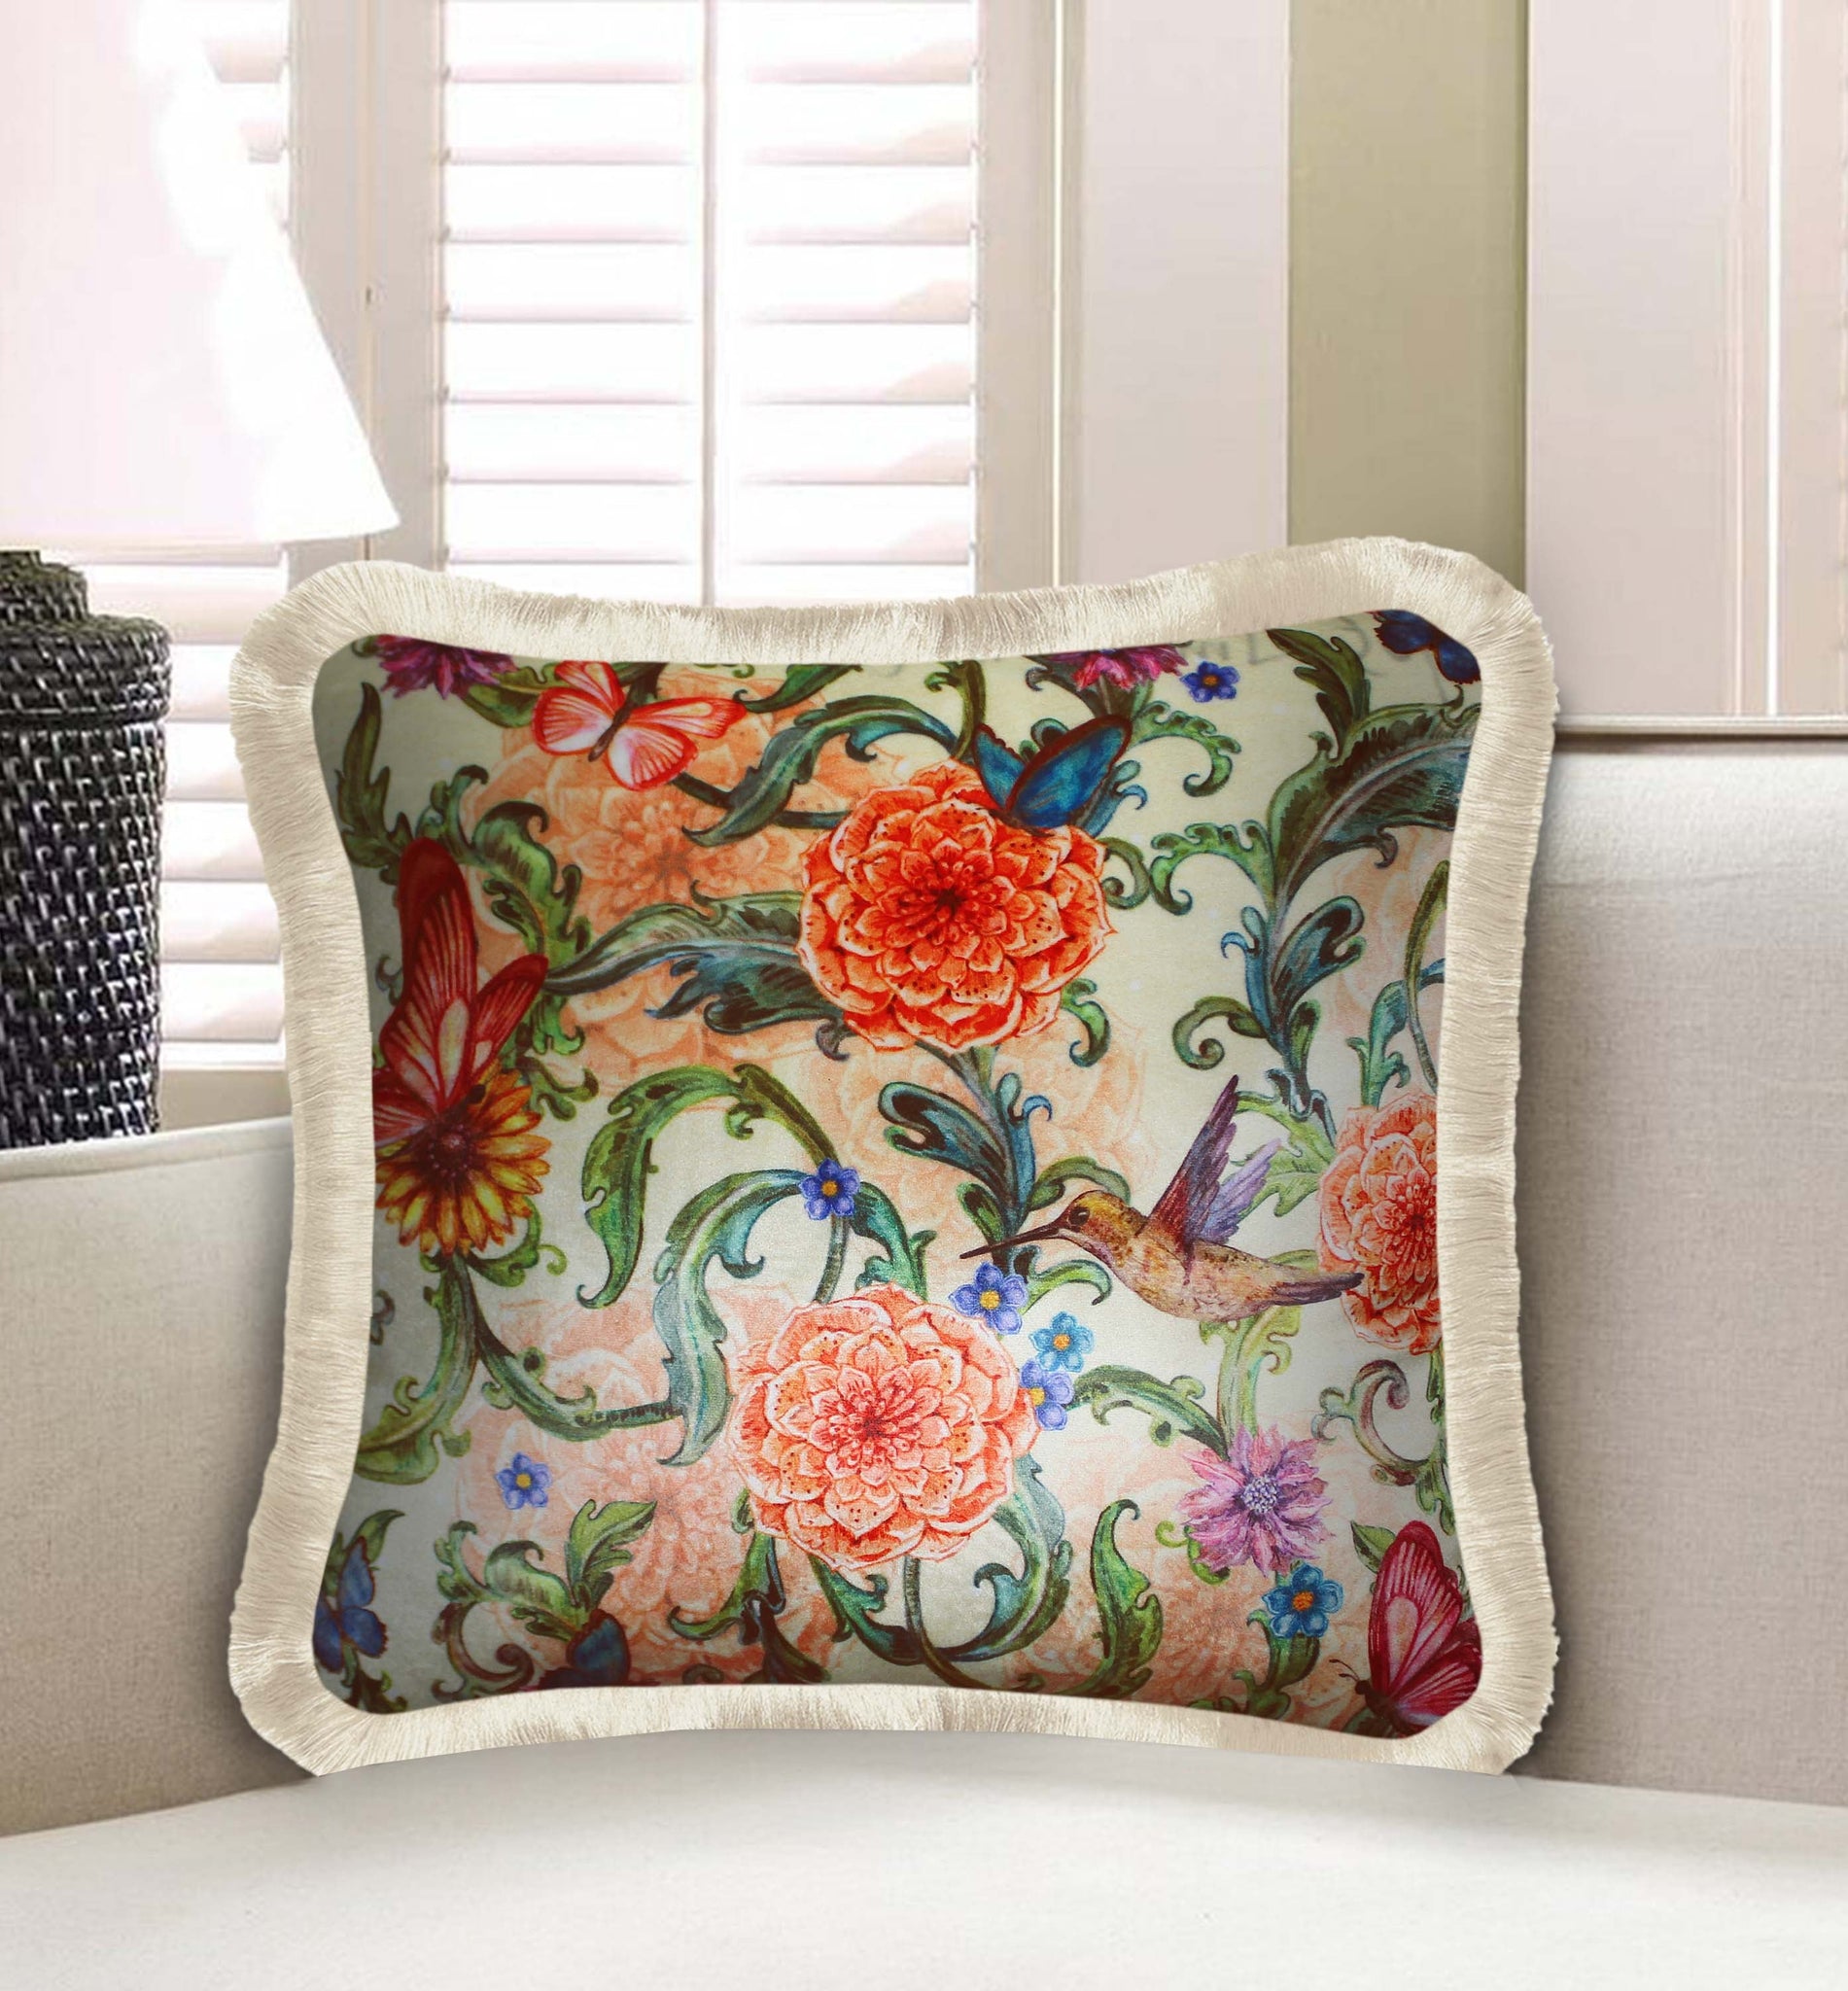 Beige Velvet Cushion Cover Exotic Floral and Hummingbird Decorative Pillow Cover Home Decor Throw Pillow for Sofa Chair Bedroom 45x45 cm 18x18 In